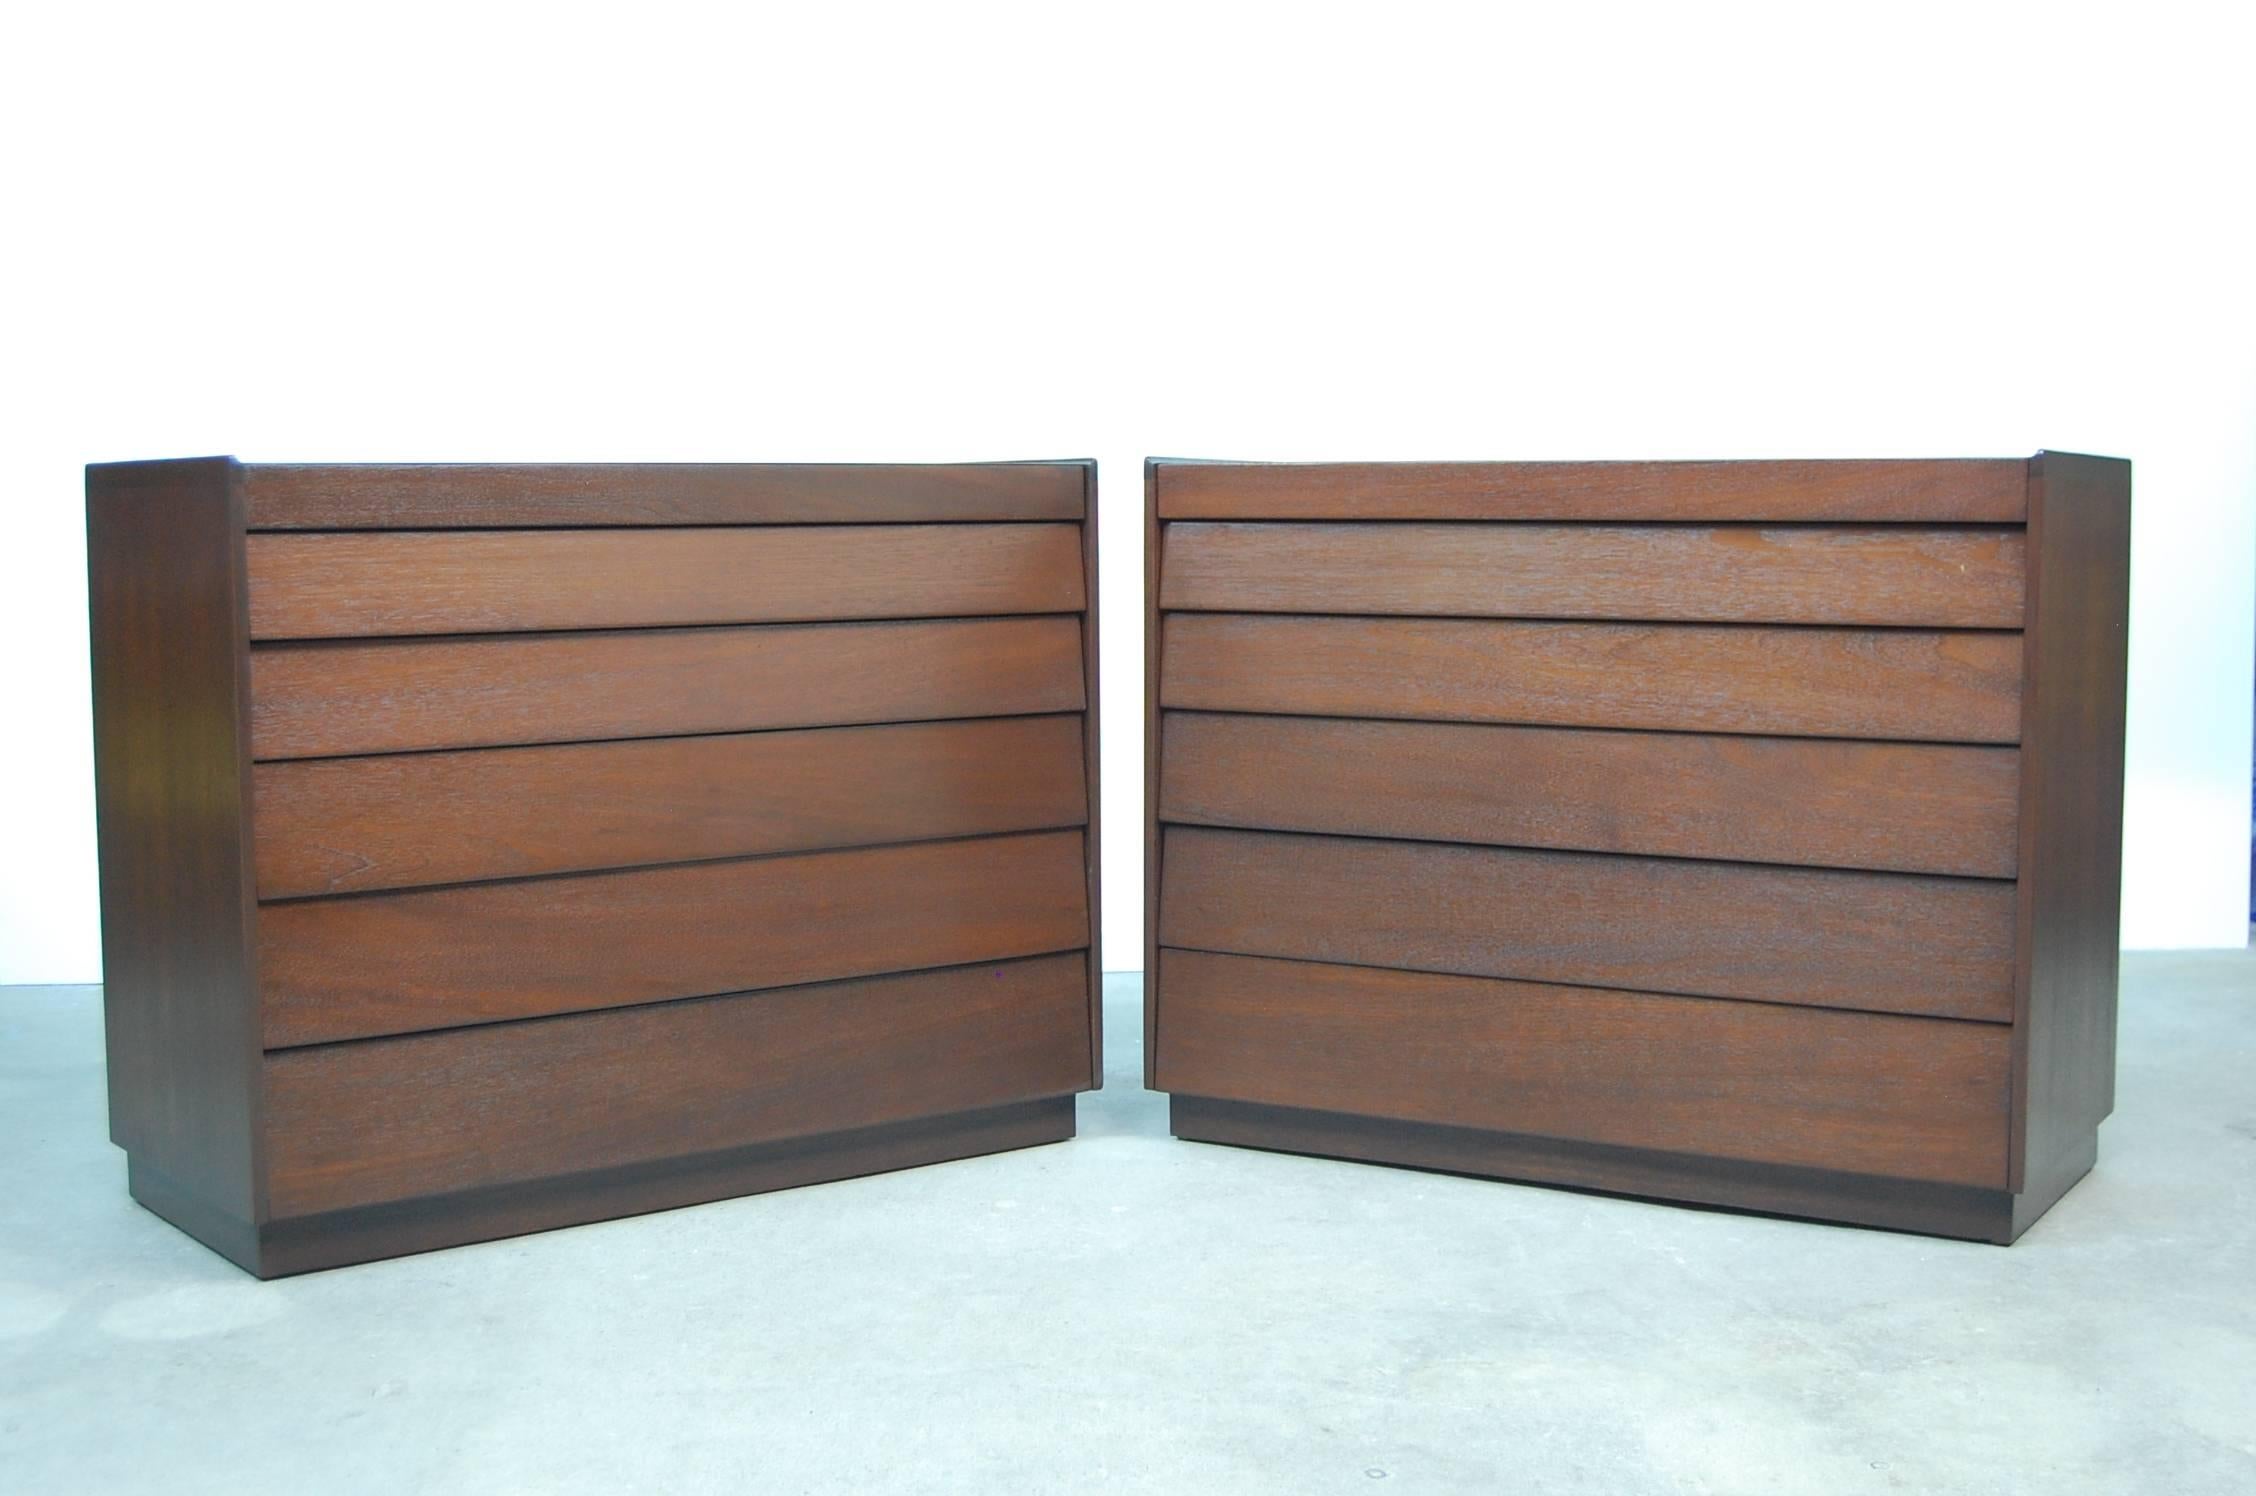 Pair of mahogany louver front dressers, designed by Edward Wormley, circa 1952. Produced by Dunbar. Professionally refinished. Each chest has a small gallery edge on three sides, and sits on a plinth base. Measure: 42